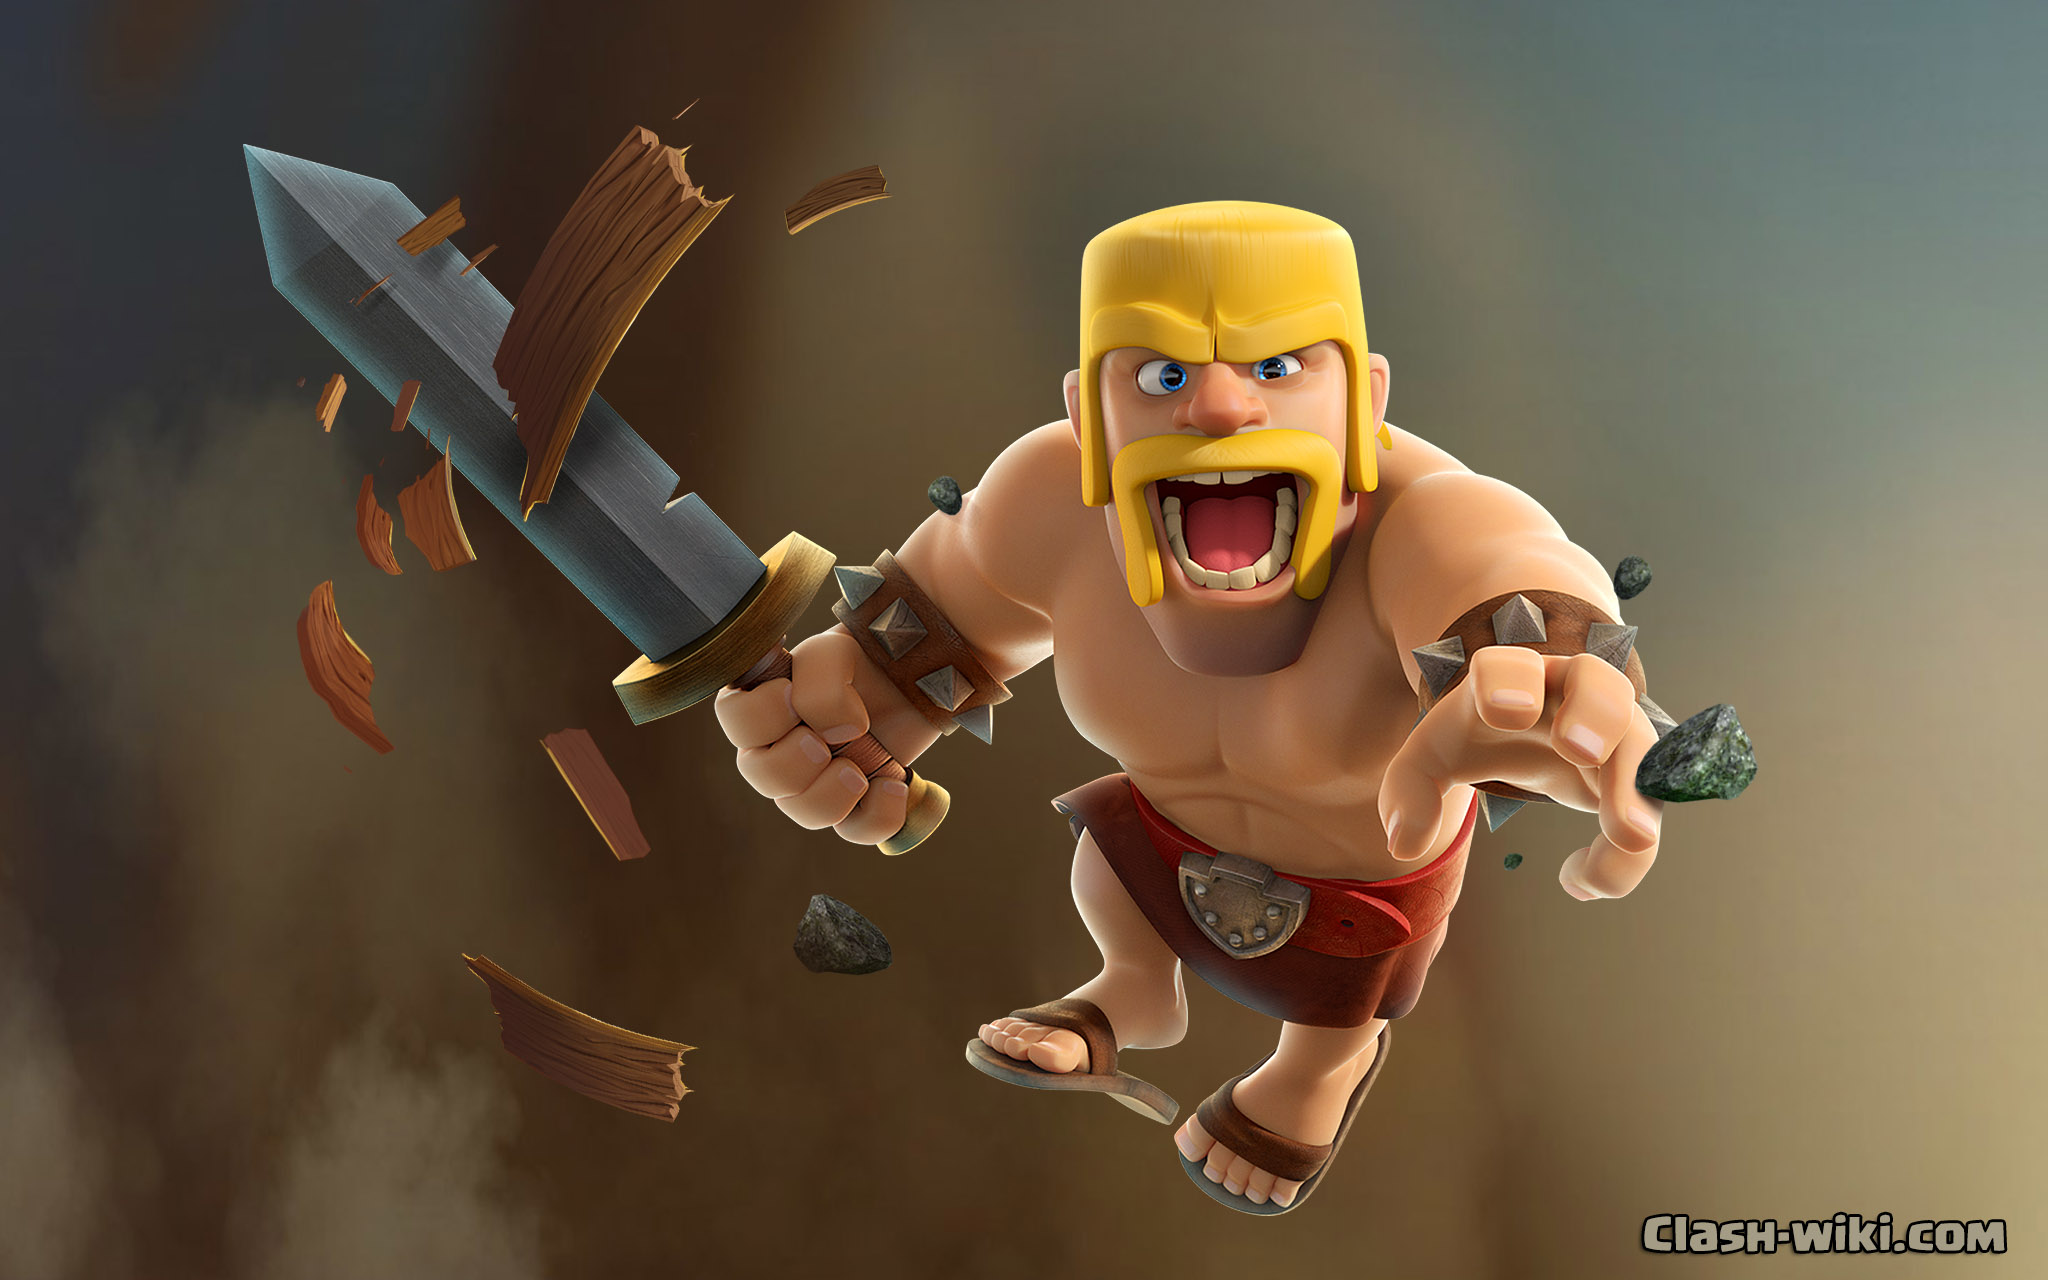 Clash Of Clans Wallpapers Clash Wikicom